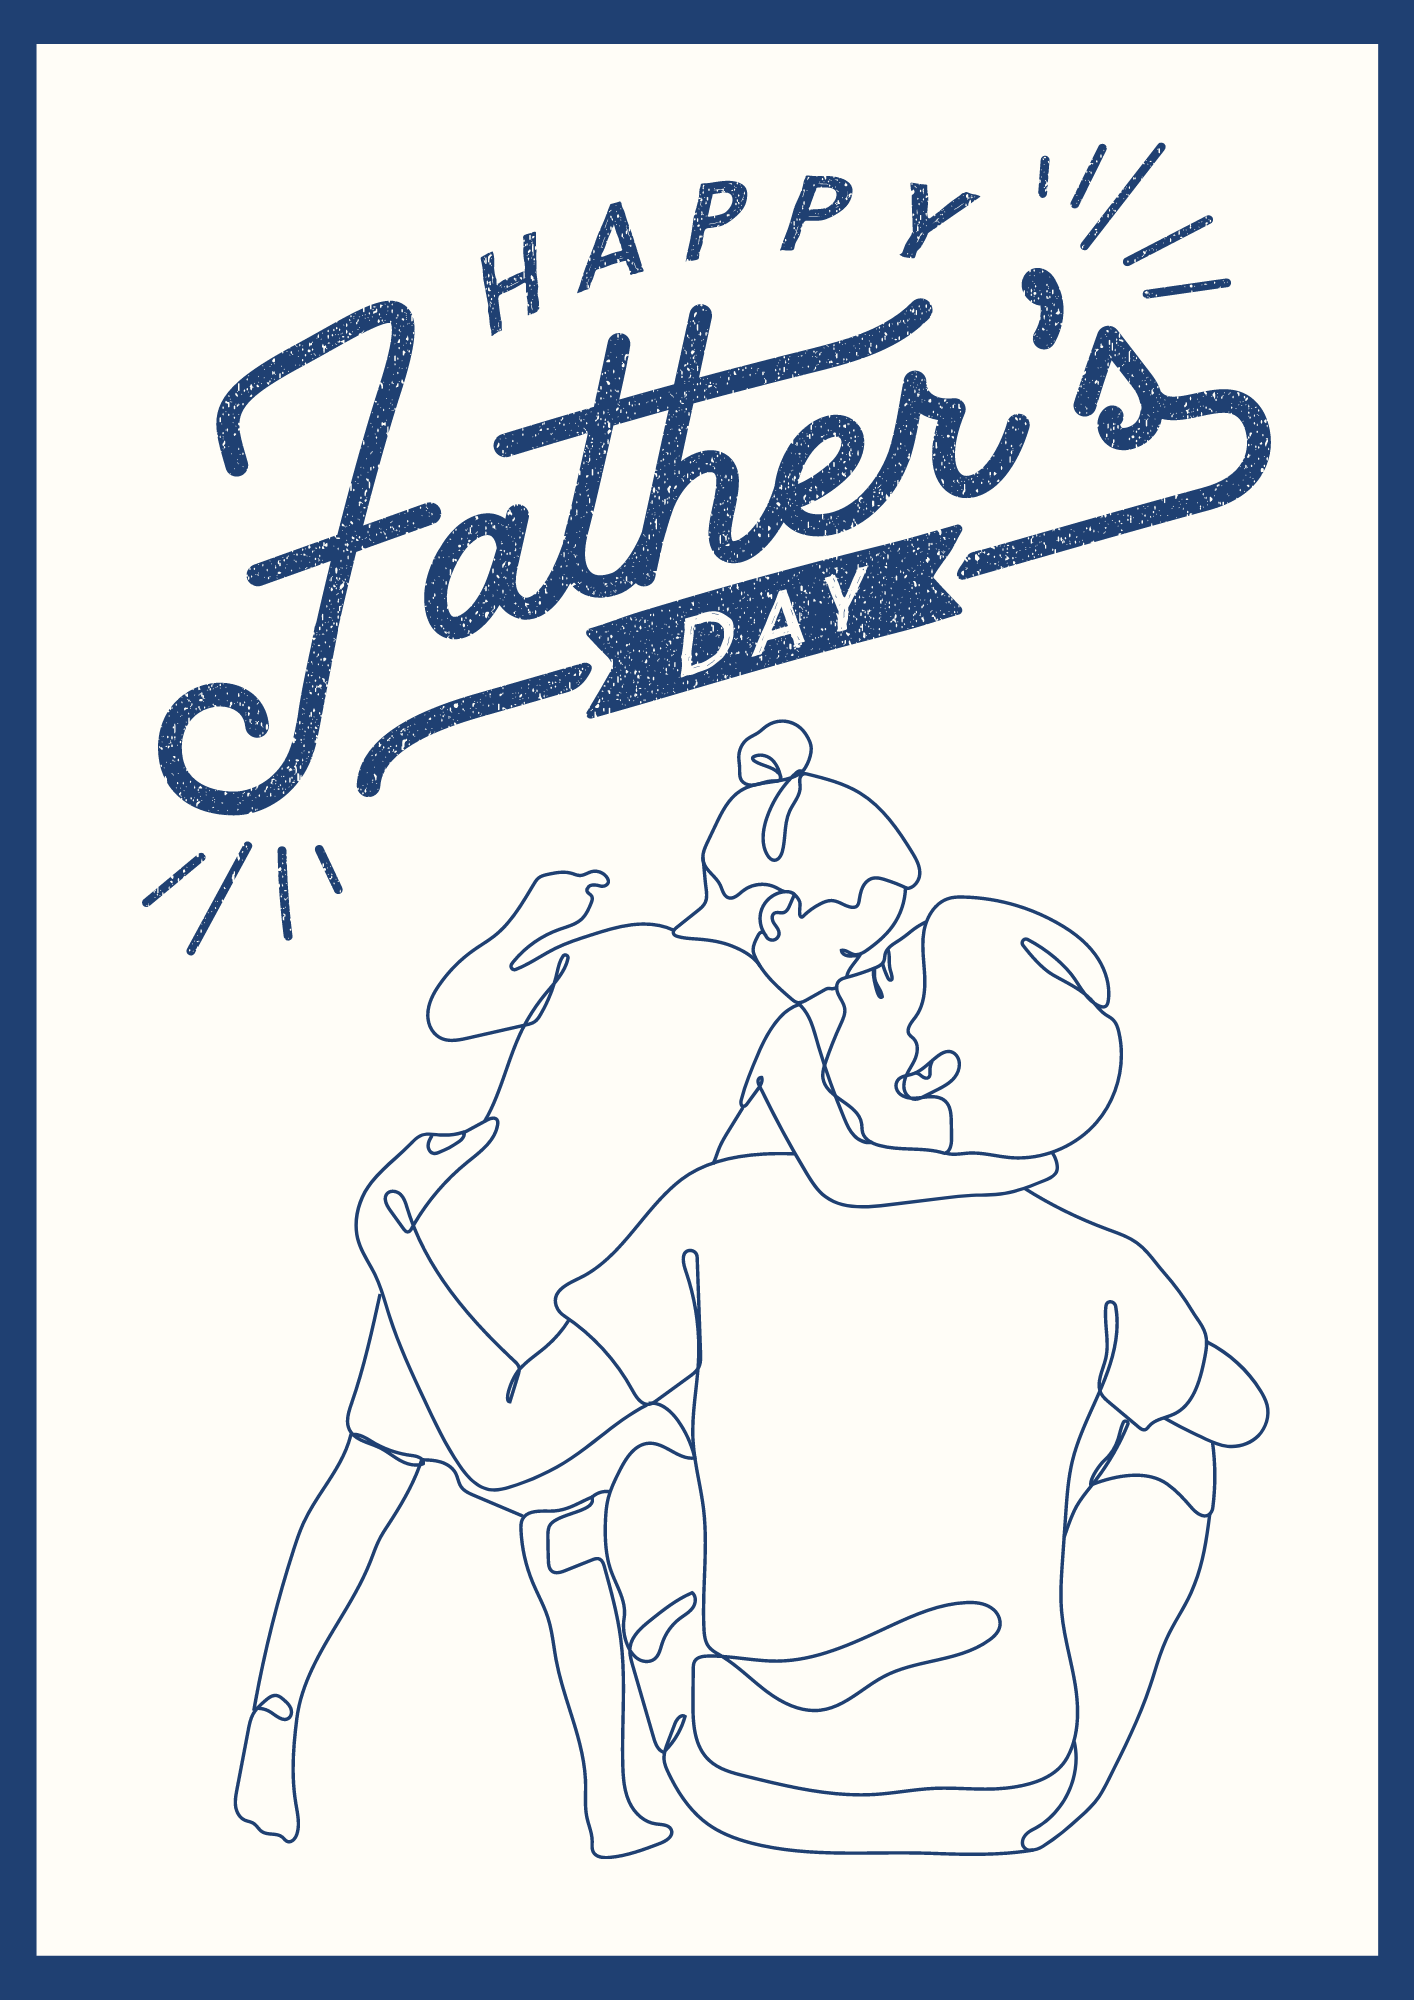 Happy Father's Day and National Watch Day! by CelmationPrince on DeviantArt